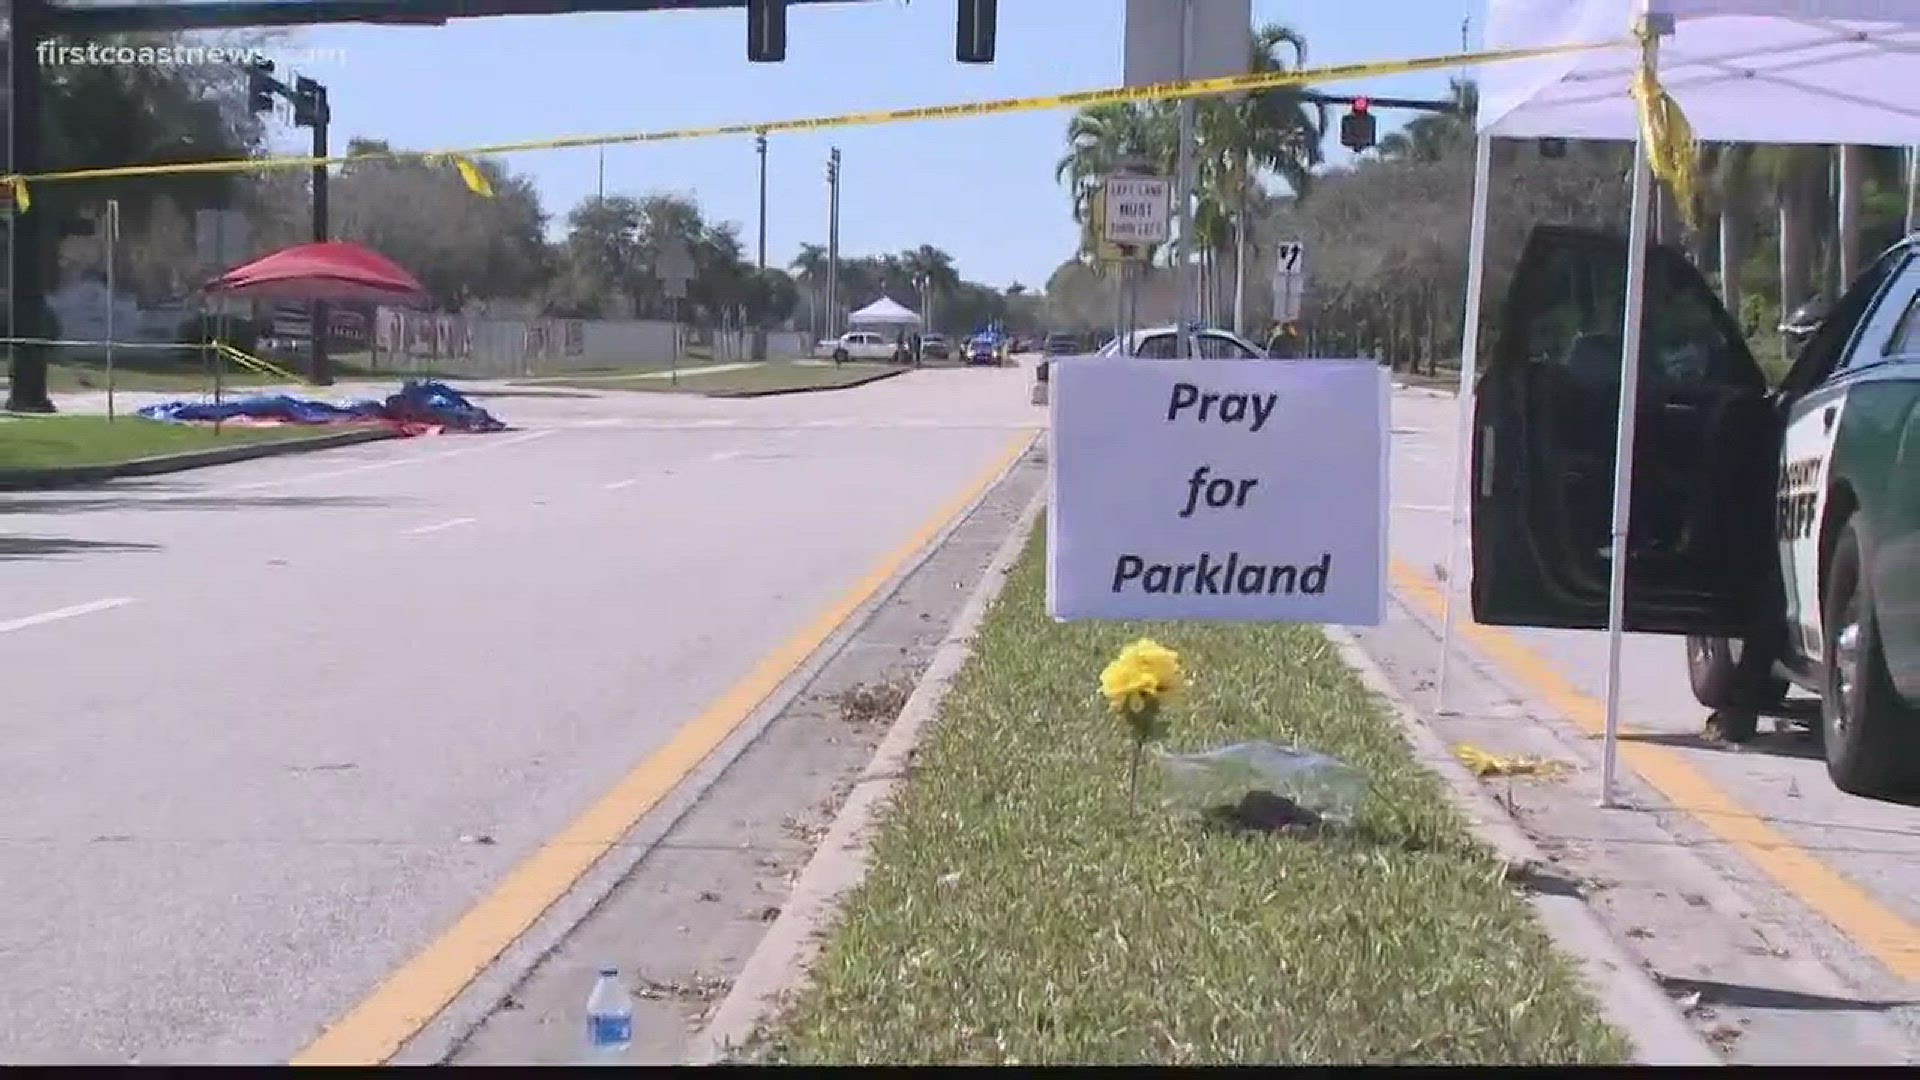 First Coast News team coverage continues from Parkland.